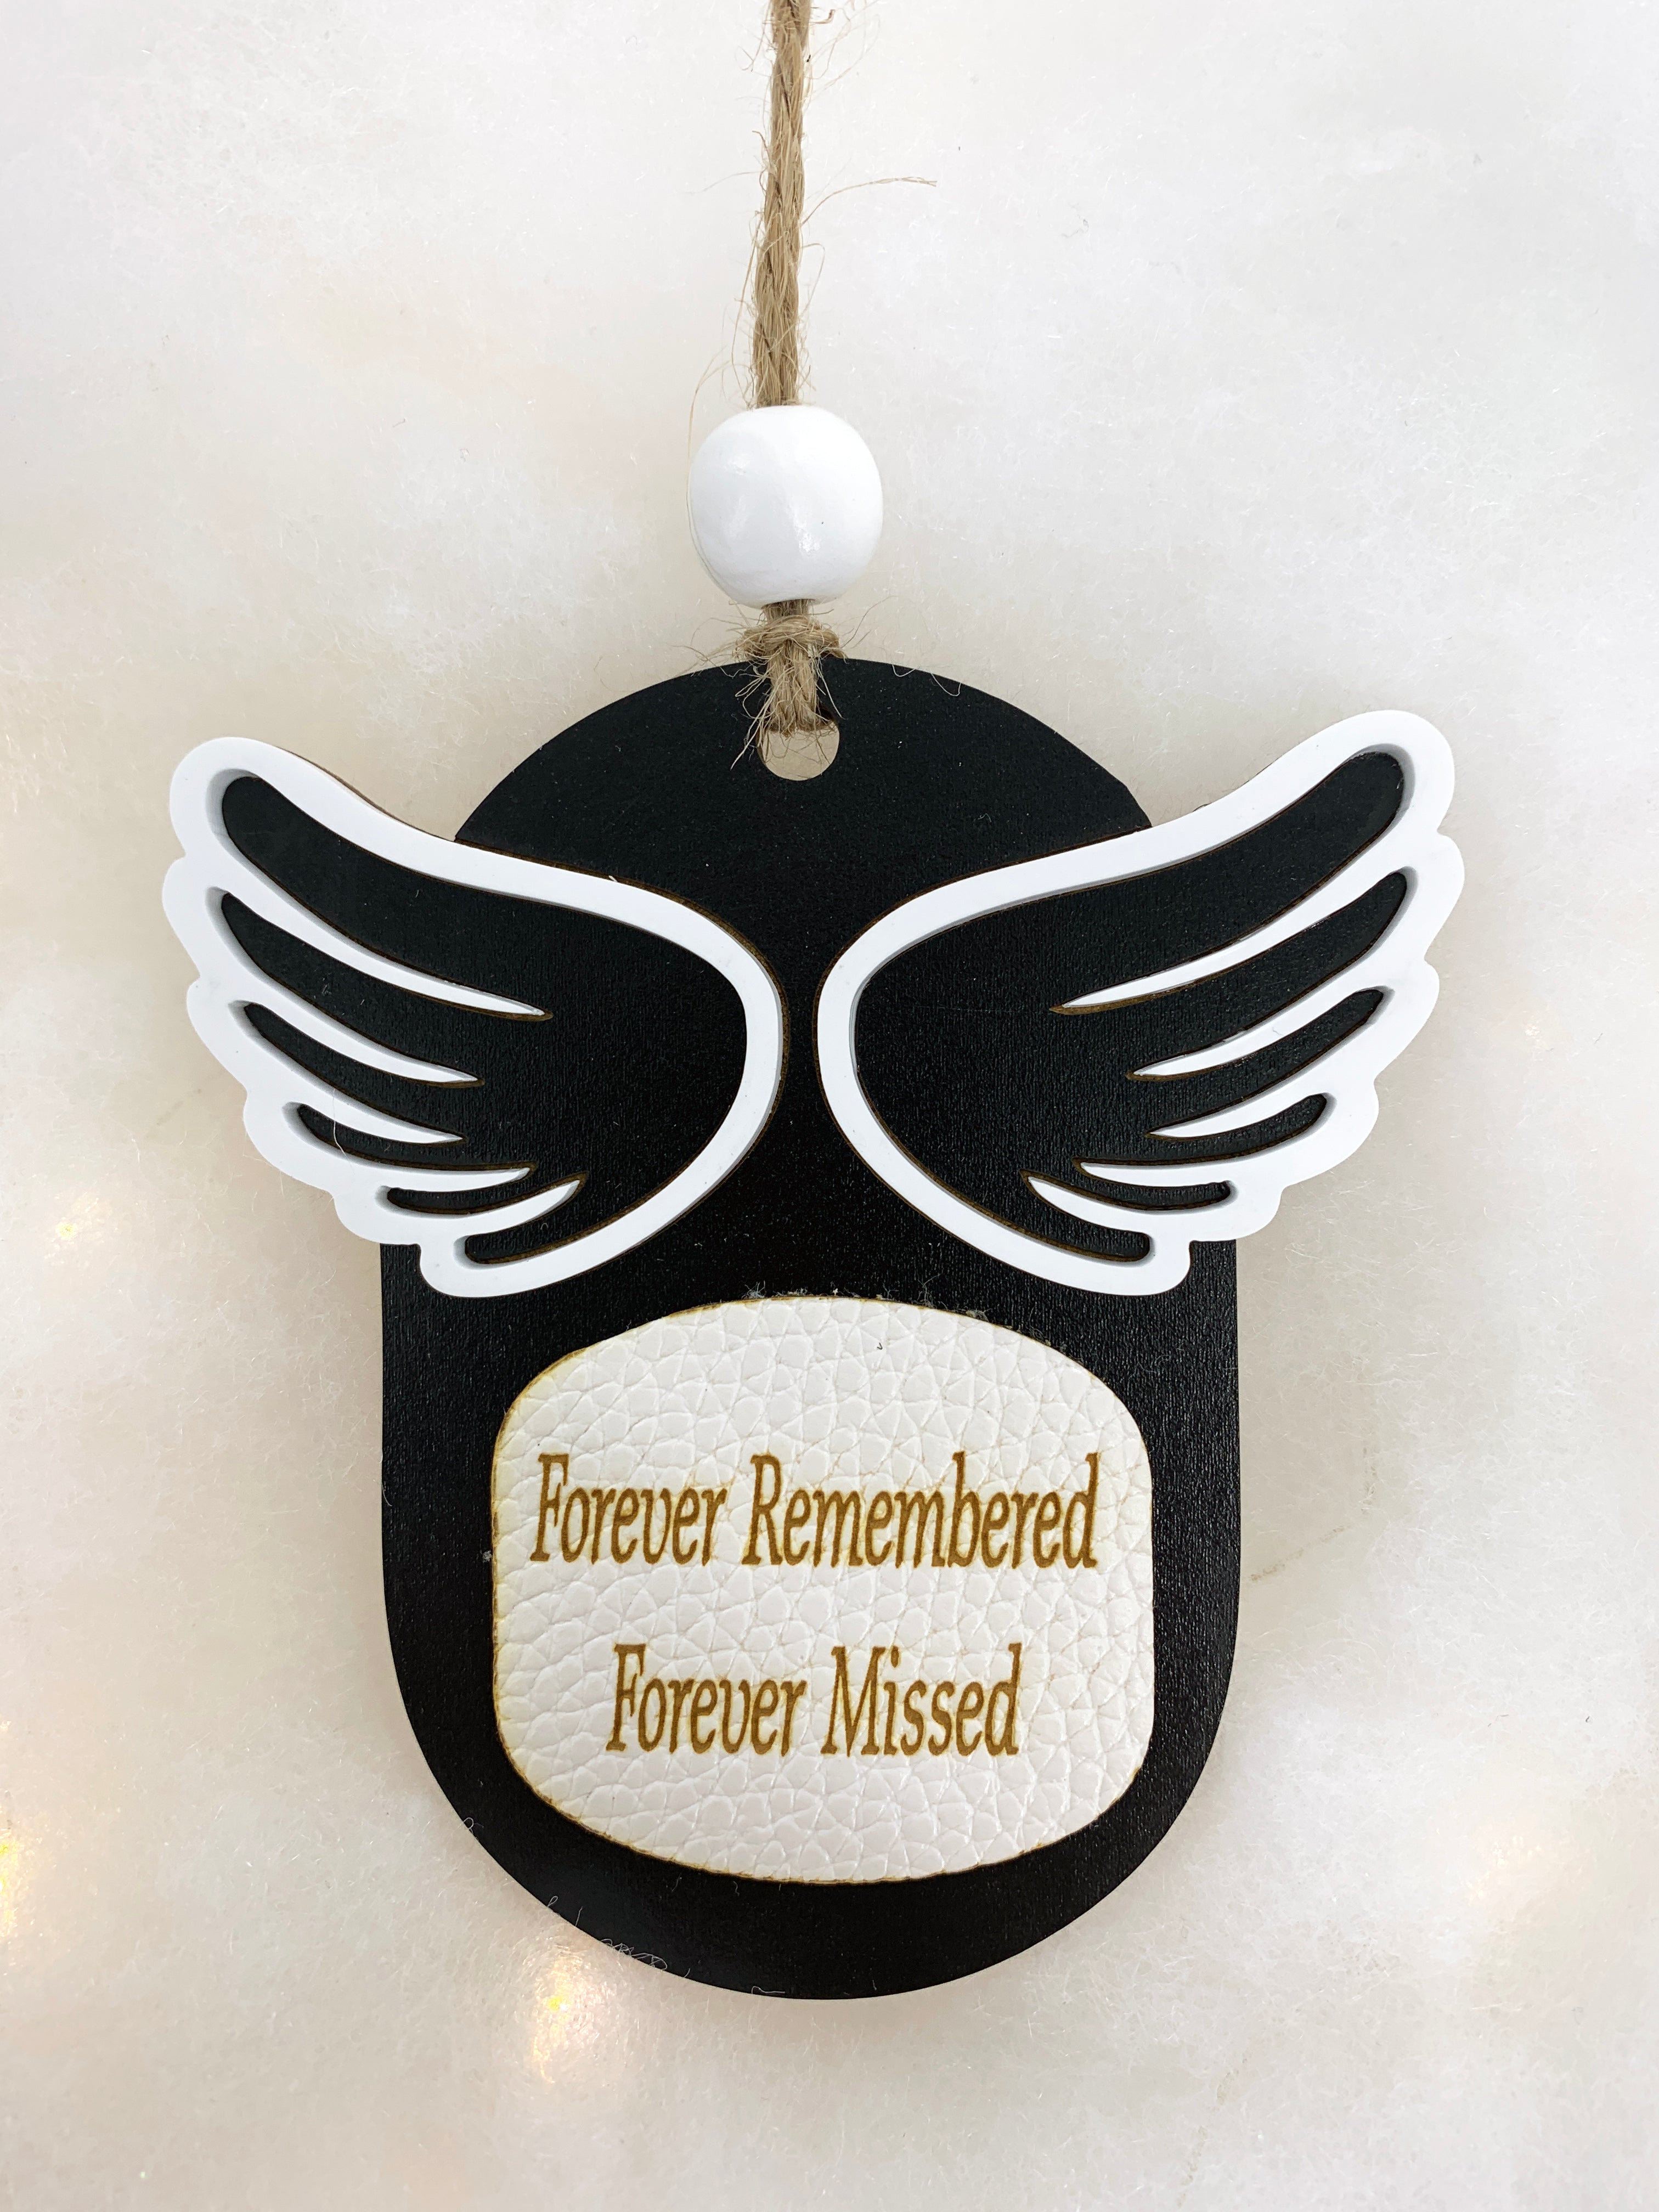 Angel Wing Memorial Holiday Ornament in Memory of Loved One Forever Remembered Forever Missed Christmas Tree Sympathy Gift by Weathered Raindrop